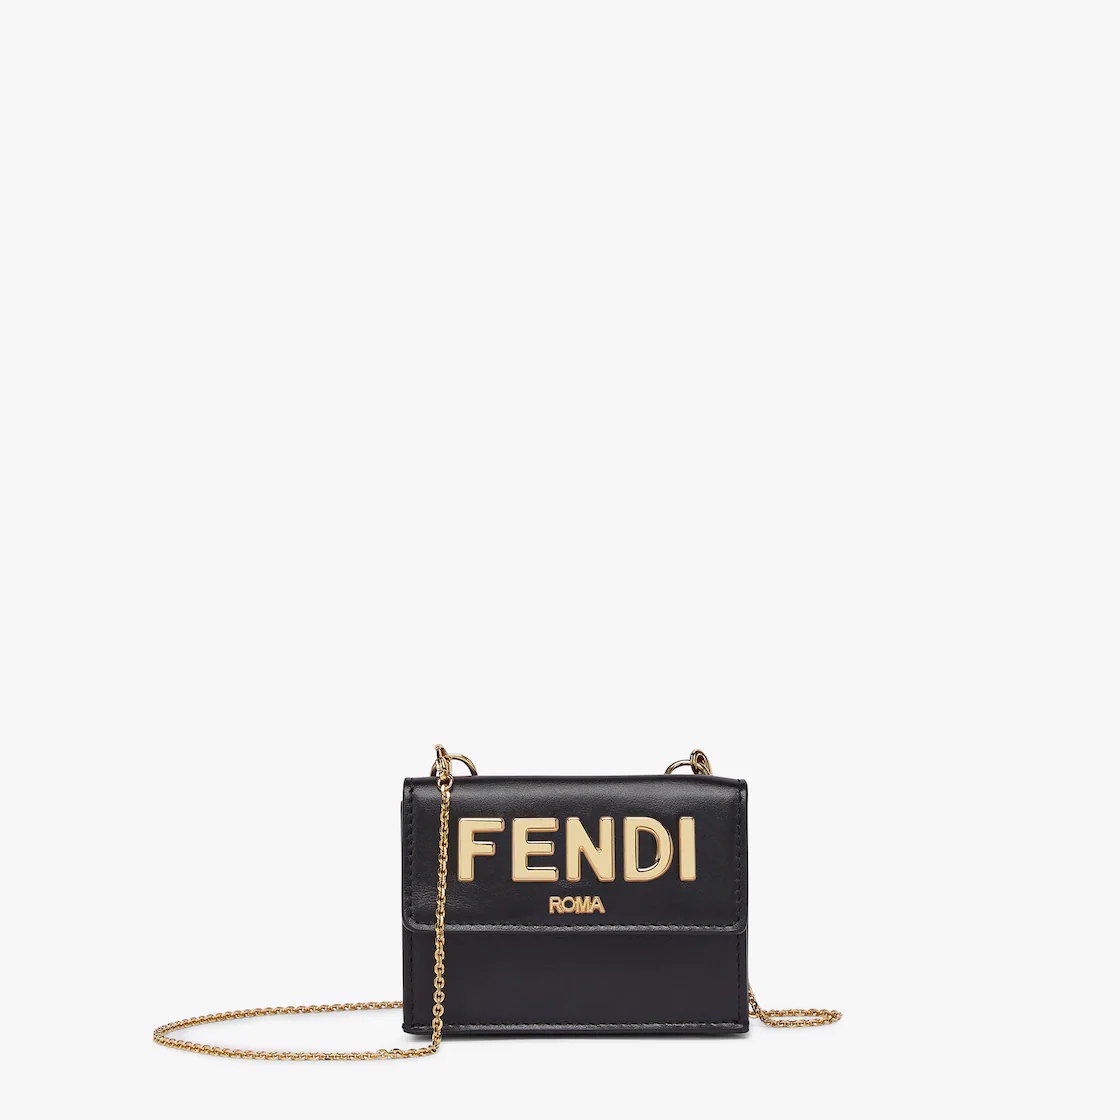 Compact-design tri-fold Fendi Roma wallet with metal chain. Interior features ten card slots, two fl - 1